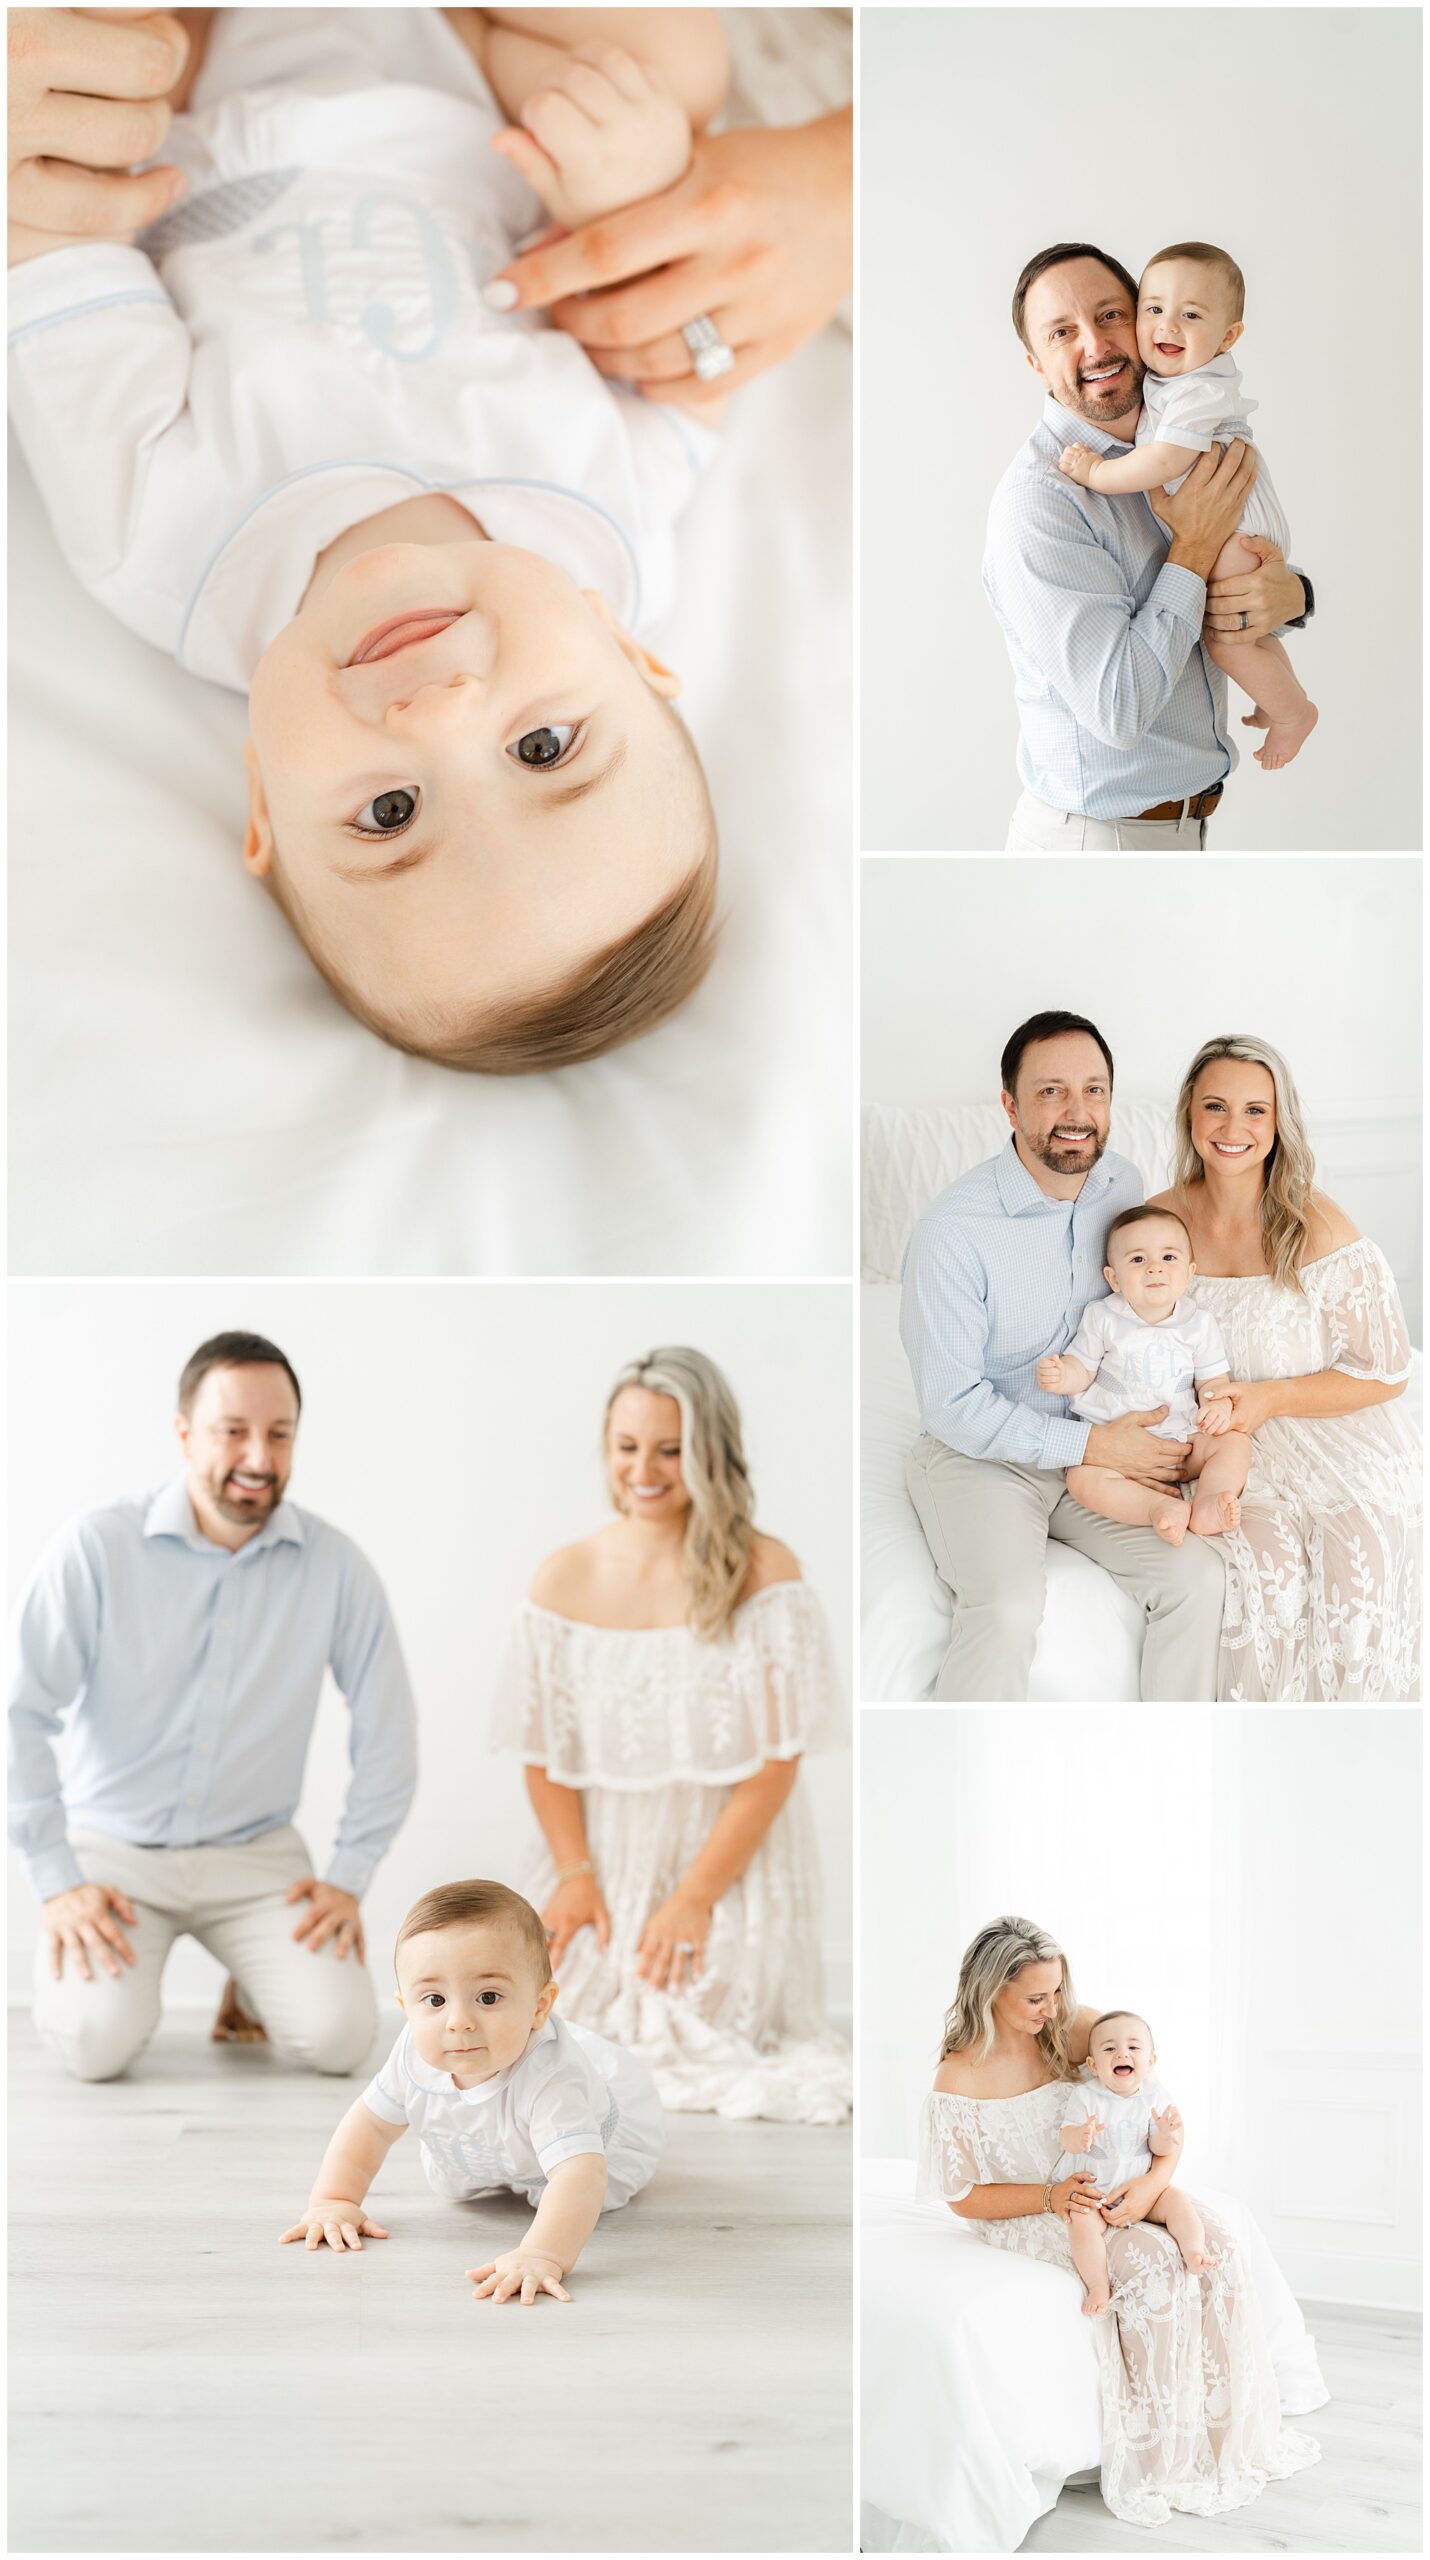 Portraits of a father and mother with their one year old for Atlanta first birthday photos in an all white studio.